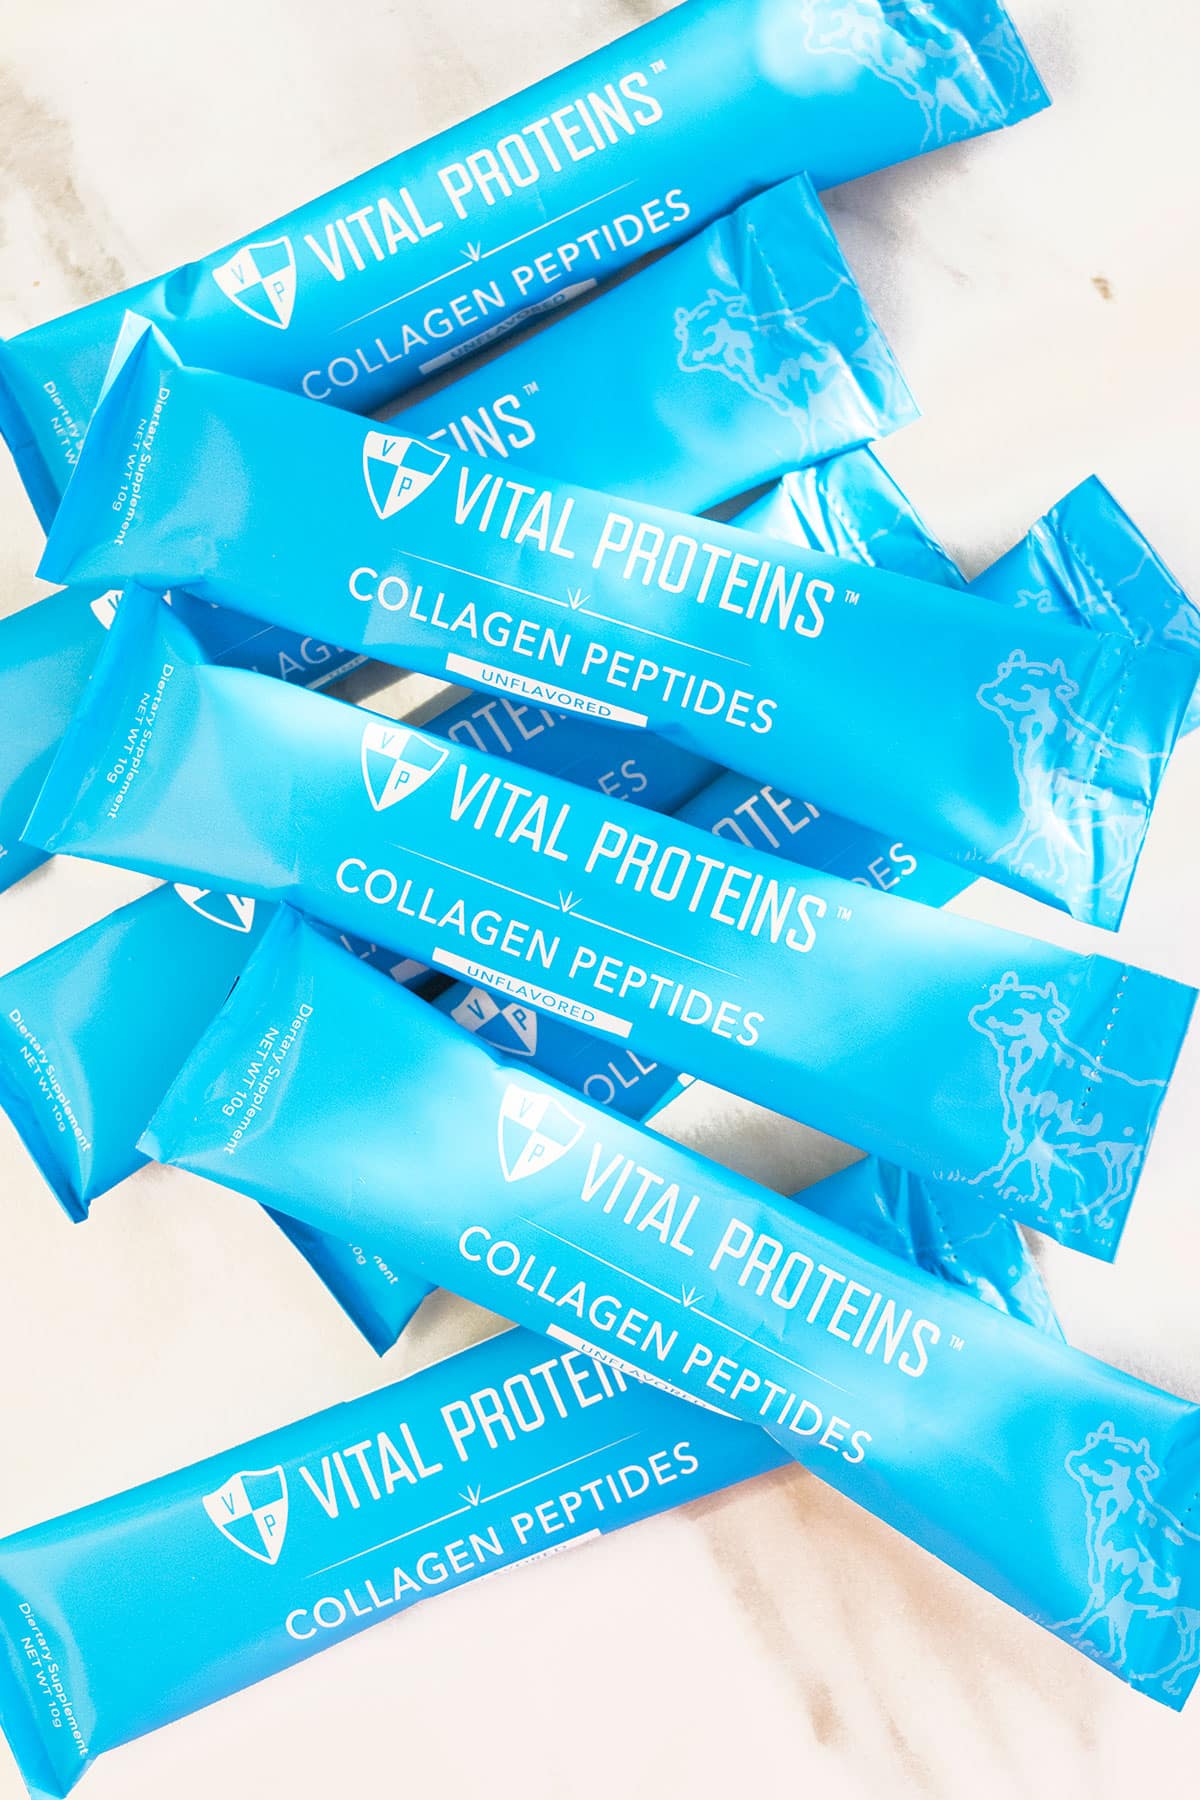 Packets of Protein Powder on White Marble Background. 